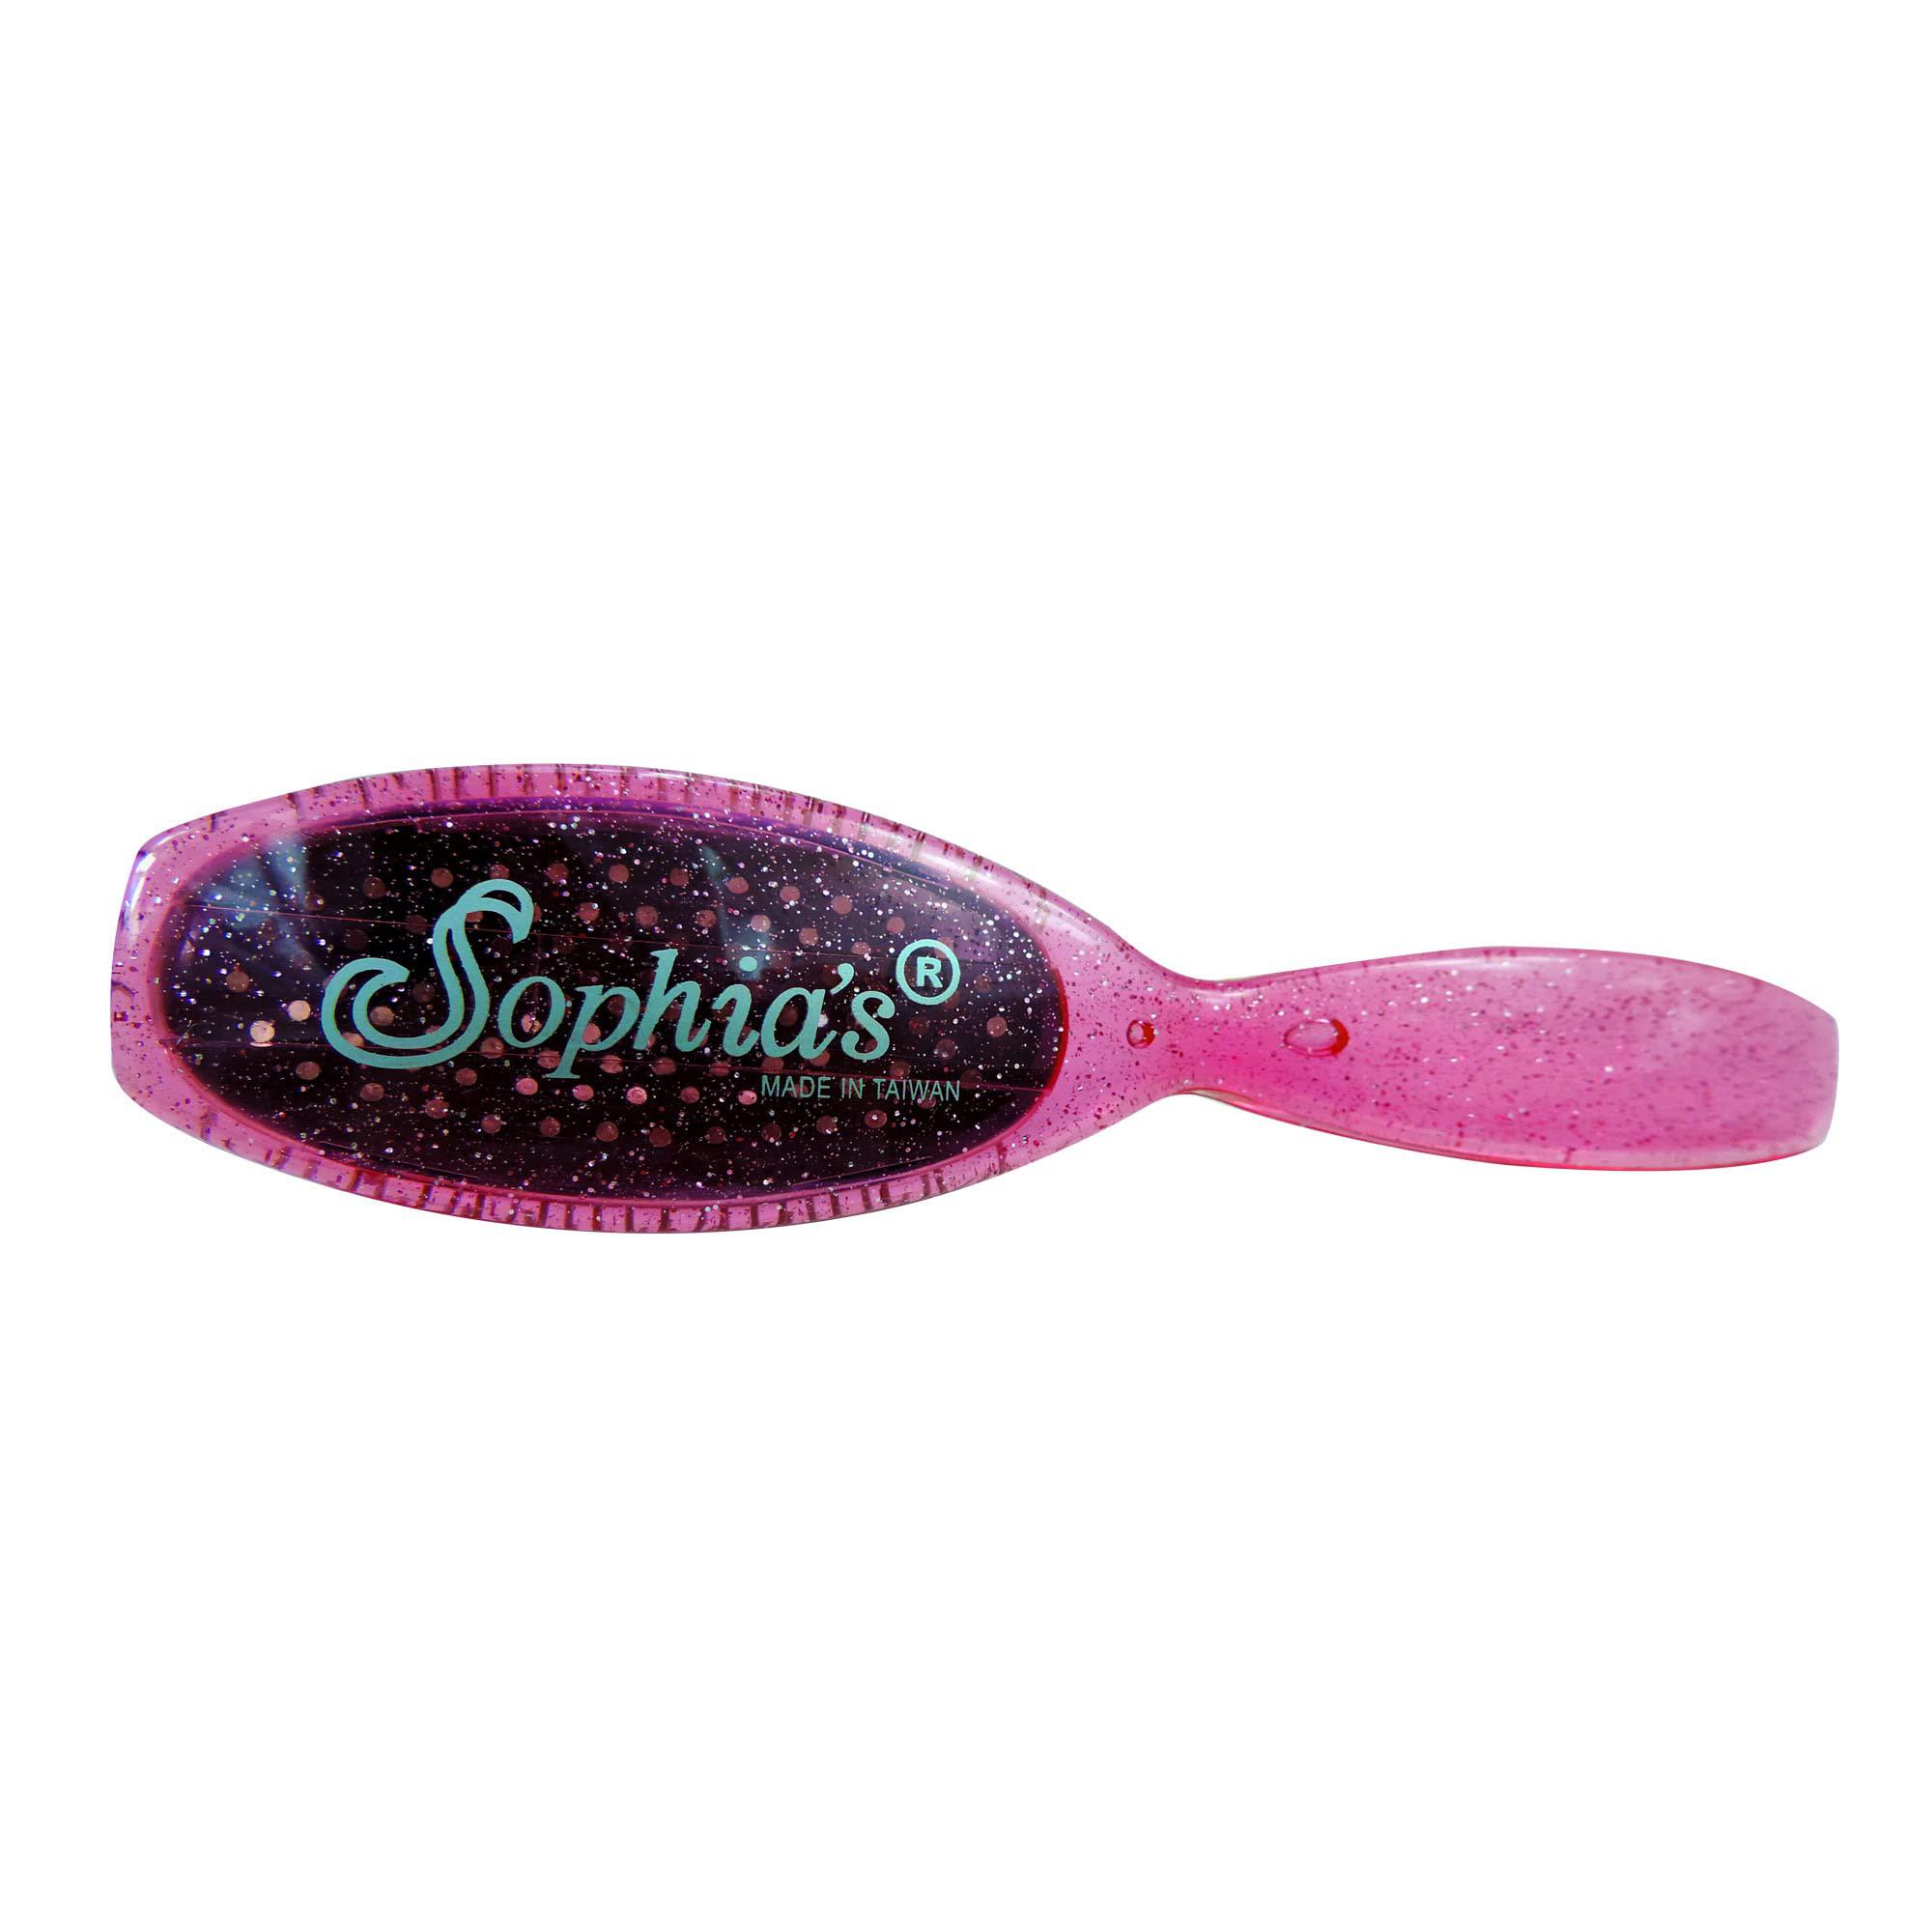 Sophia\'s sophia's doll hair brush, ideal for dolls with synthetic or wig-like hair, sized for smaller hands, in glittery hot pink